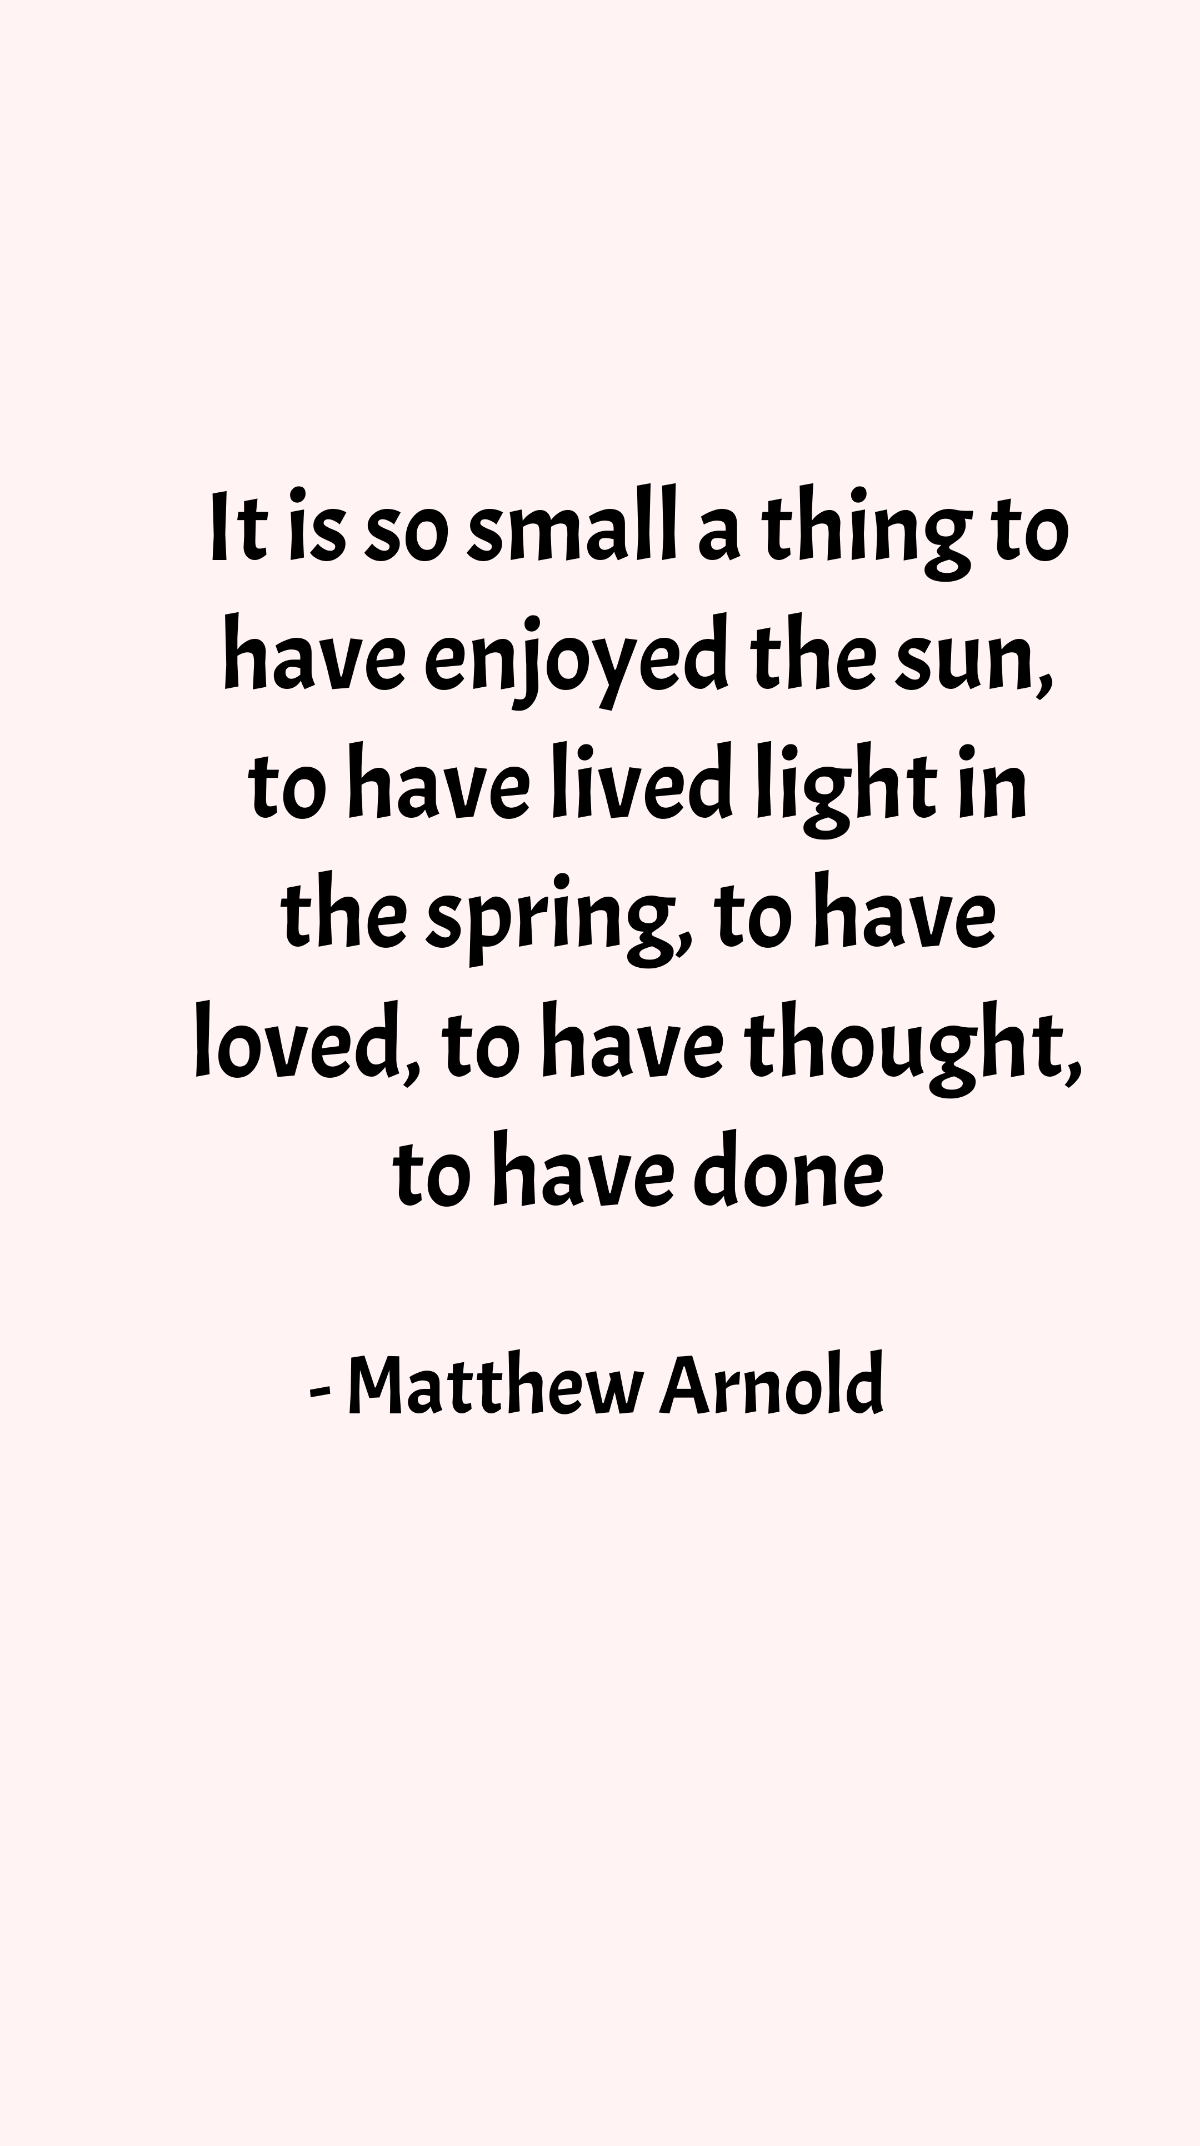 Free Matthew Arnold - It is so small a thing to have enjoyed the sun, to have lived light in the spring, to have loved, to have thought, to have done Template